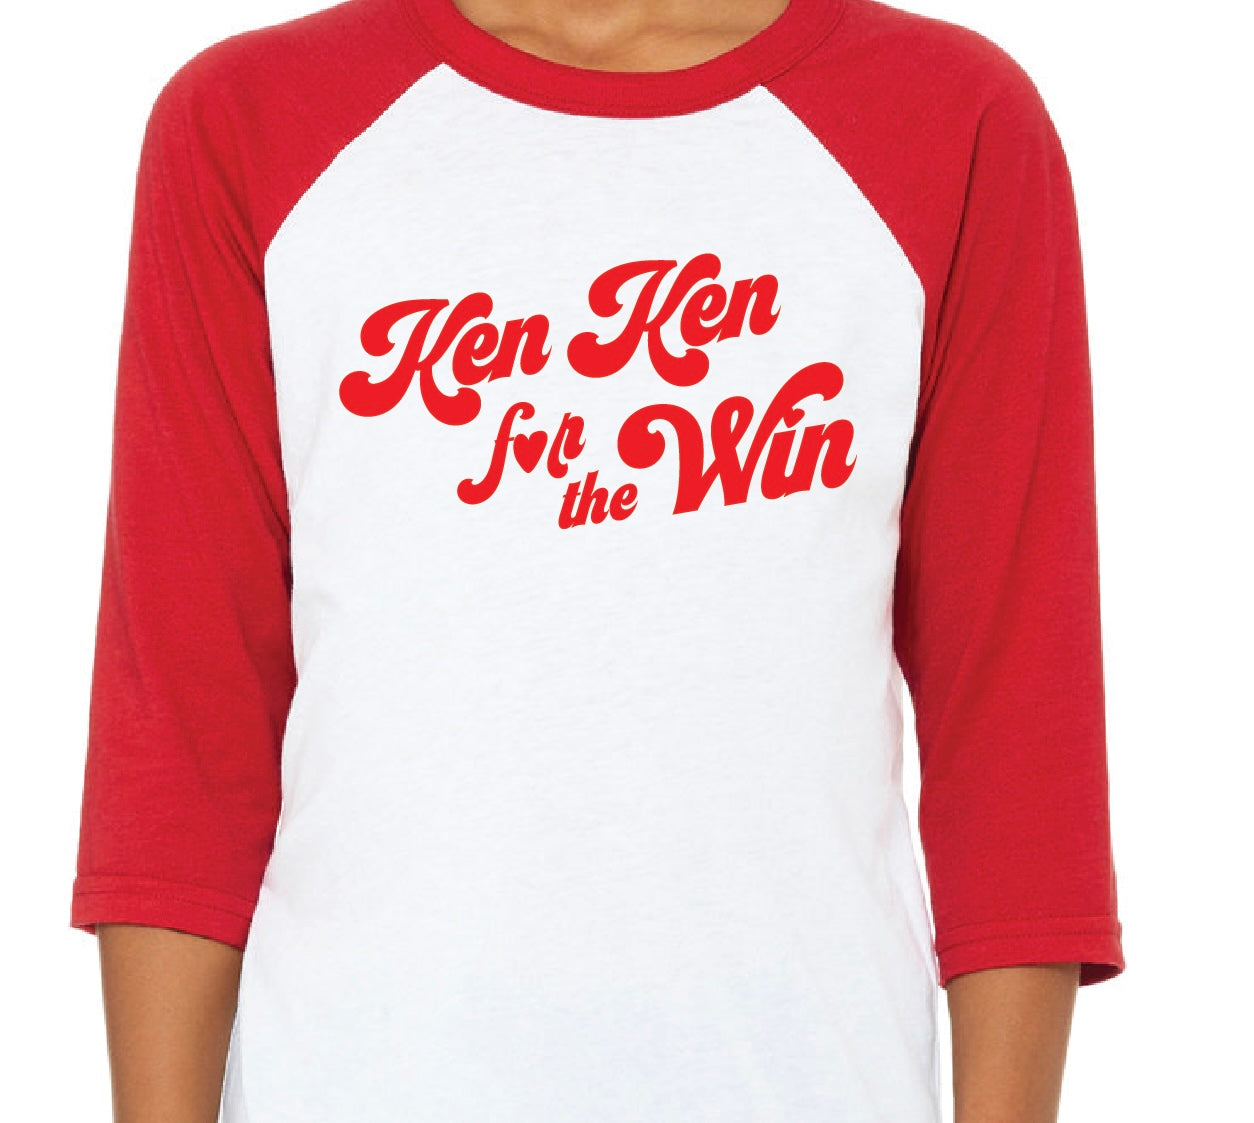 Ken Ken for the Win Collection